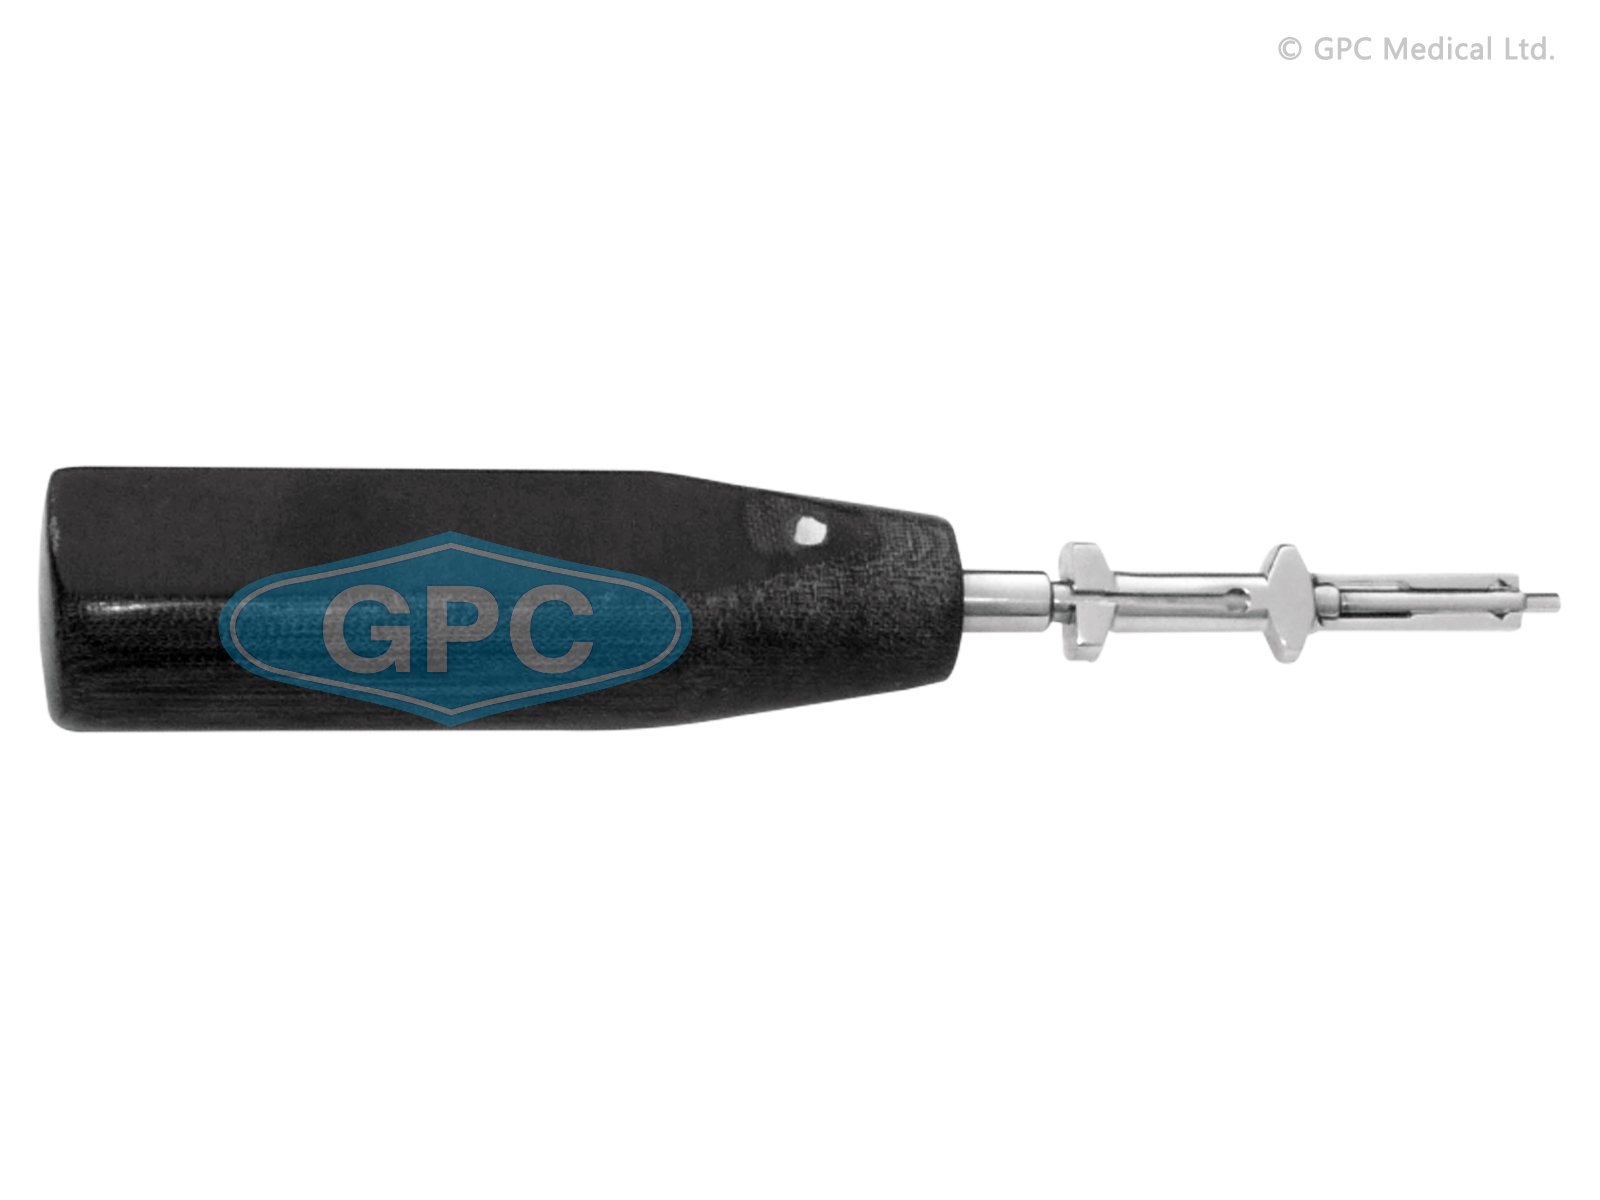 Torque Screw Driver with holding sleeve